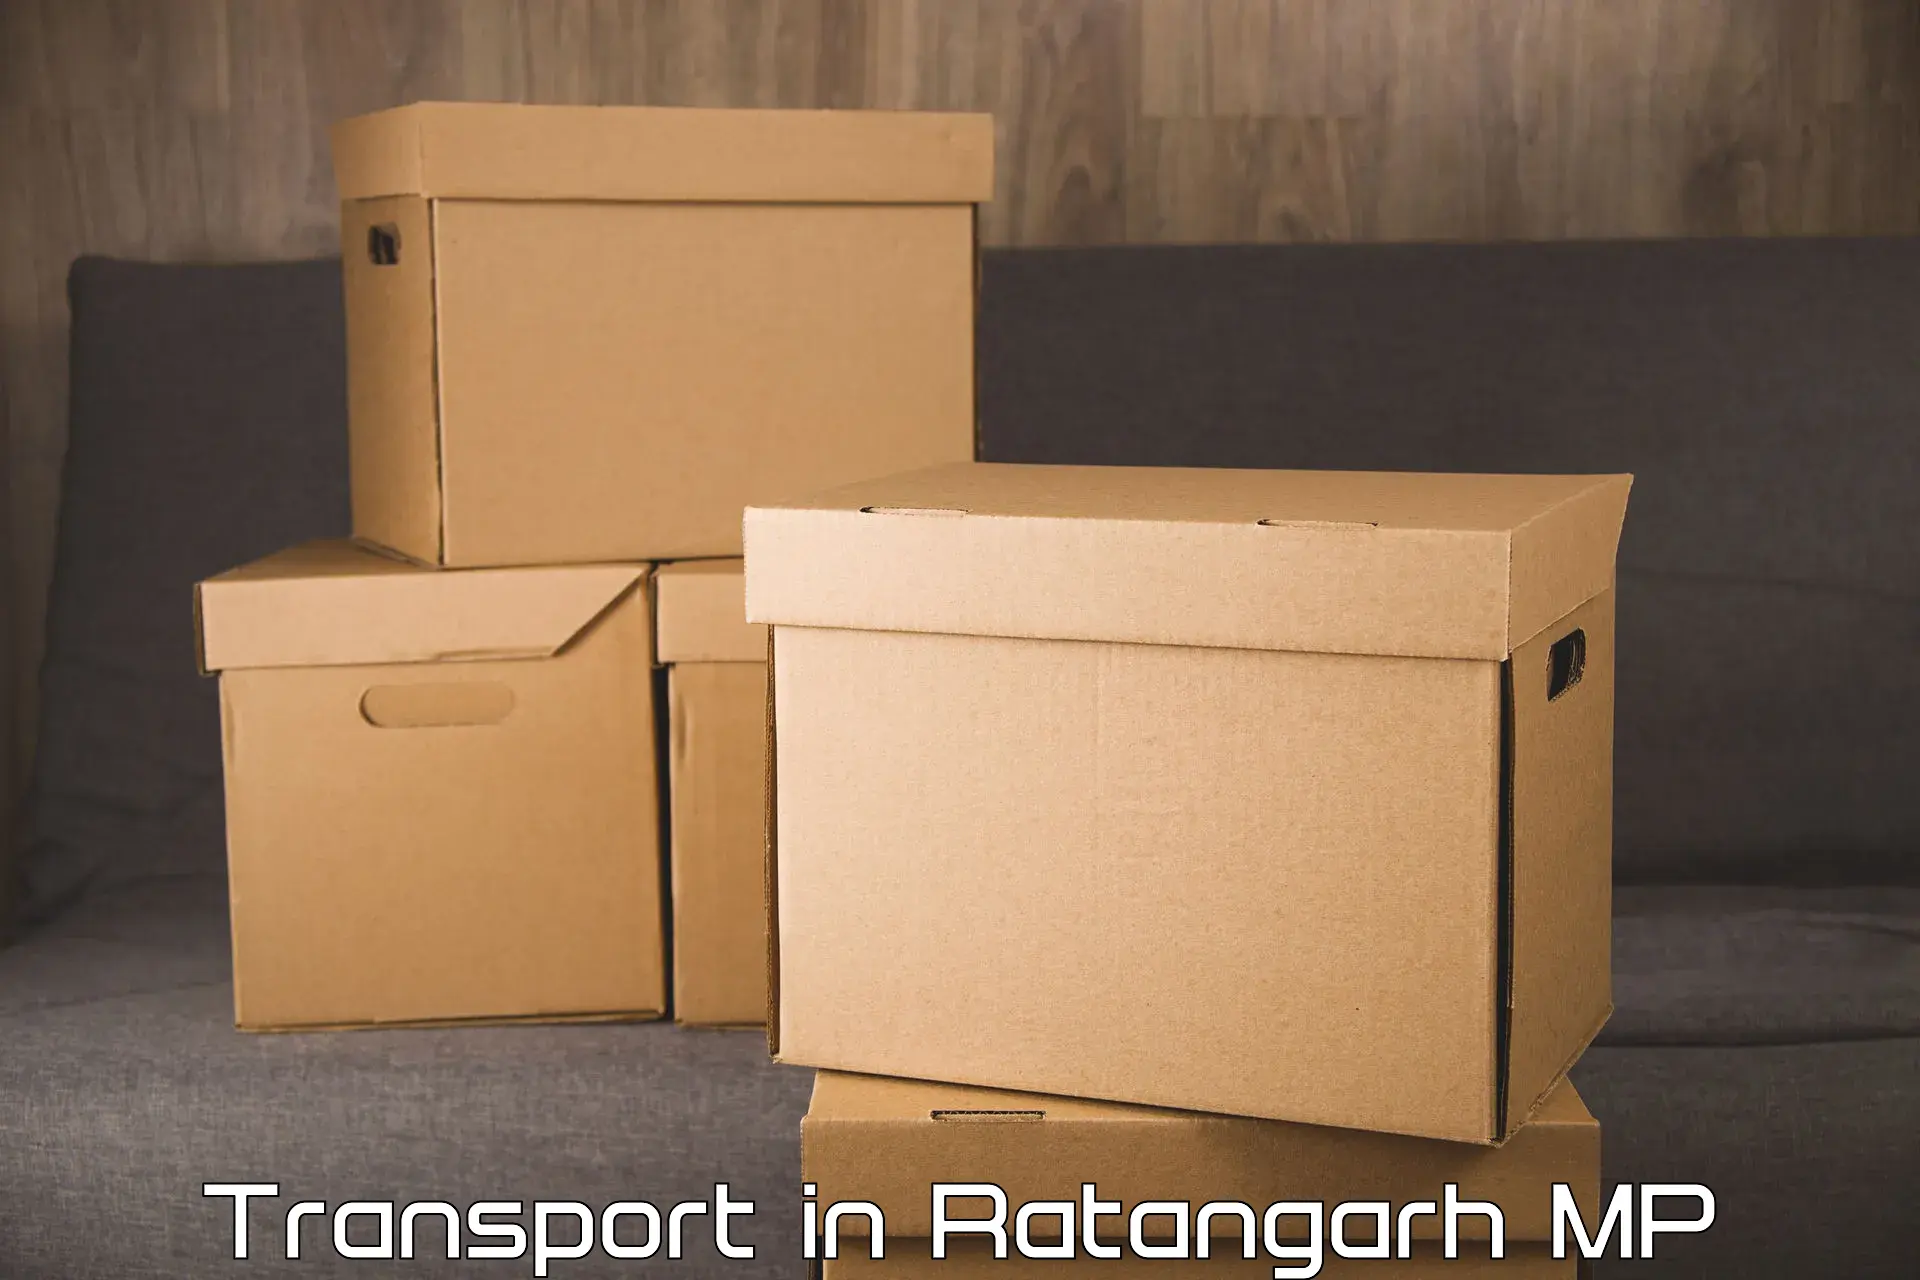 Container transportation services in Ratangarh MP